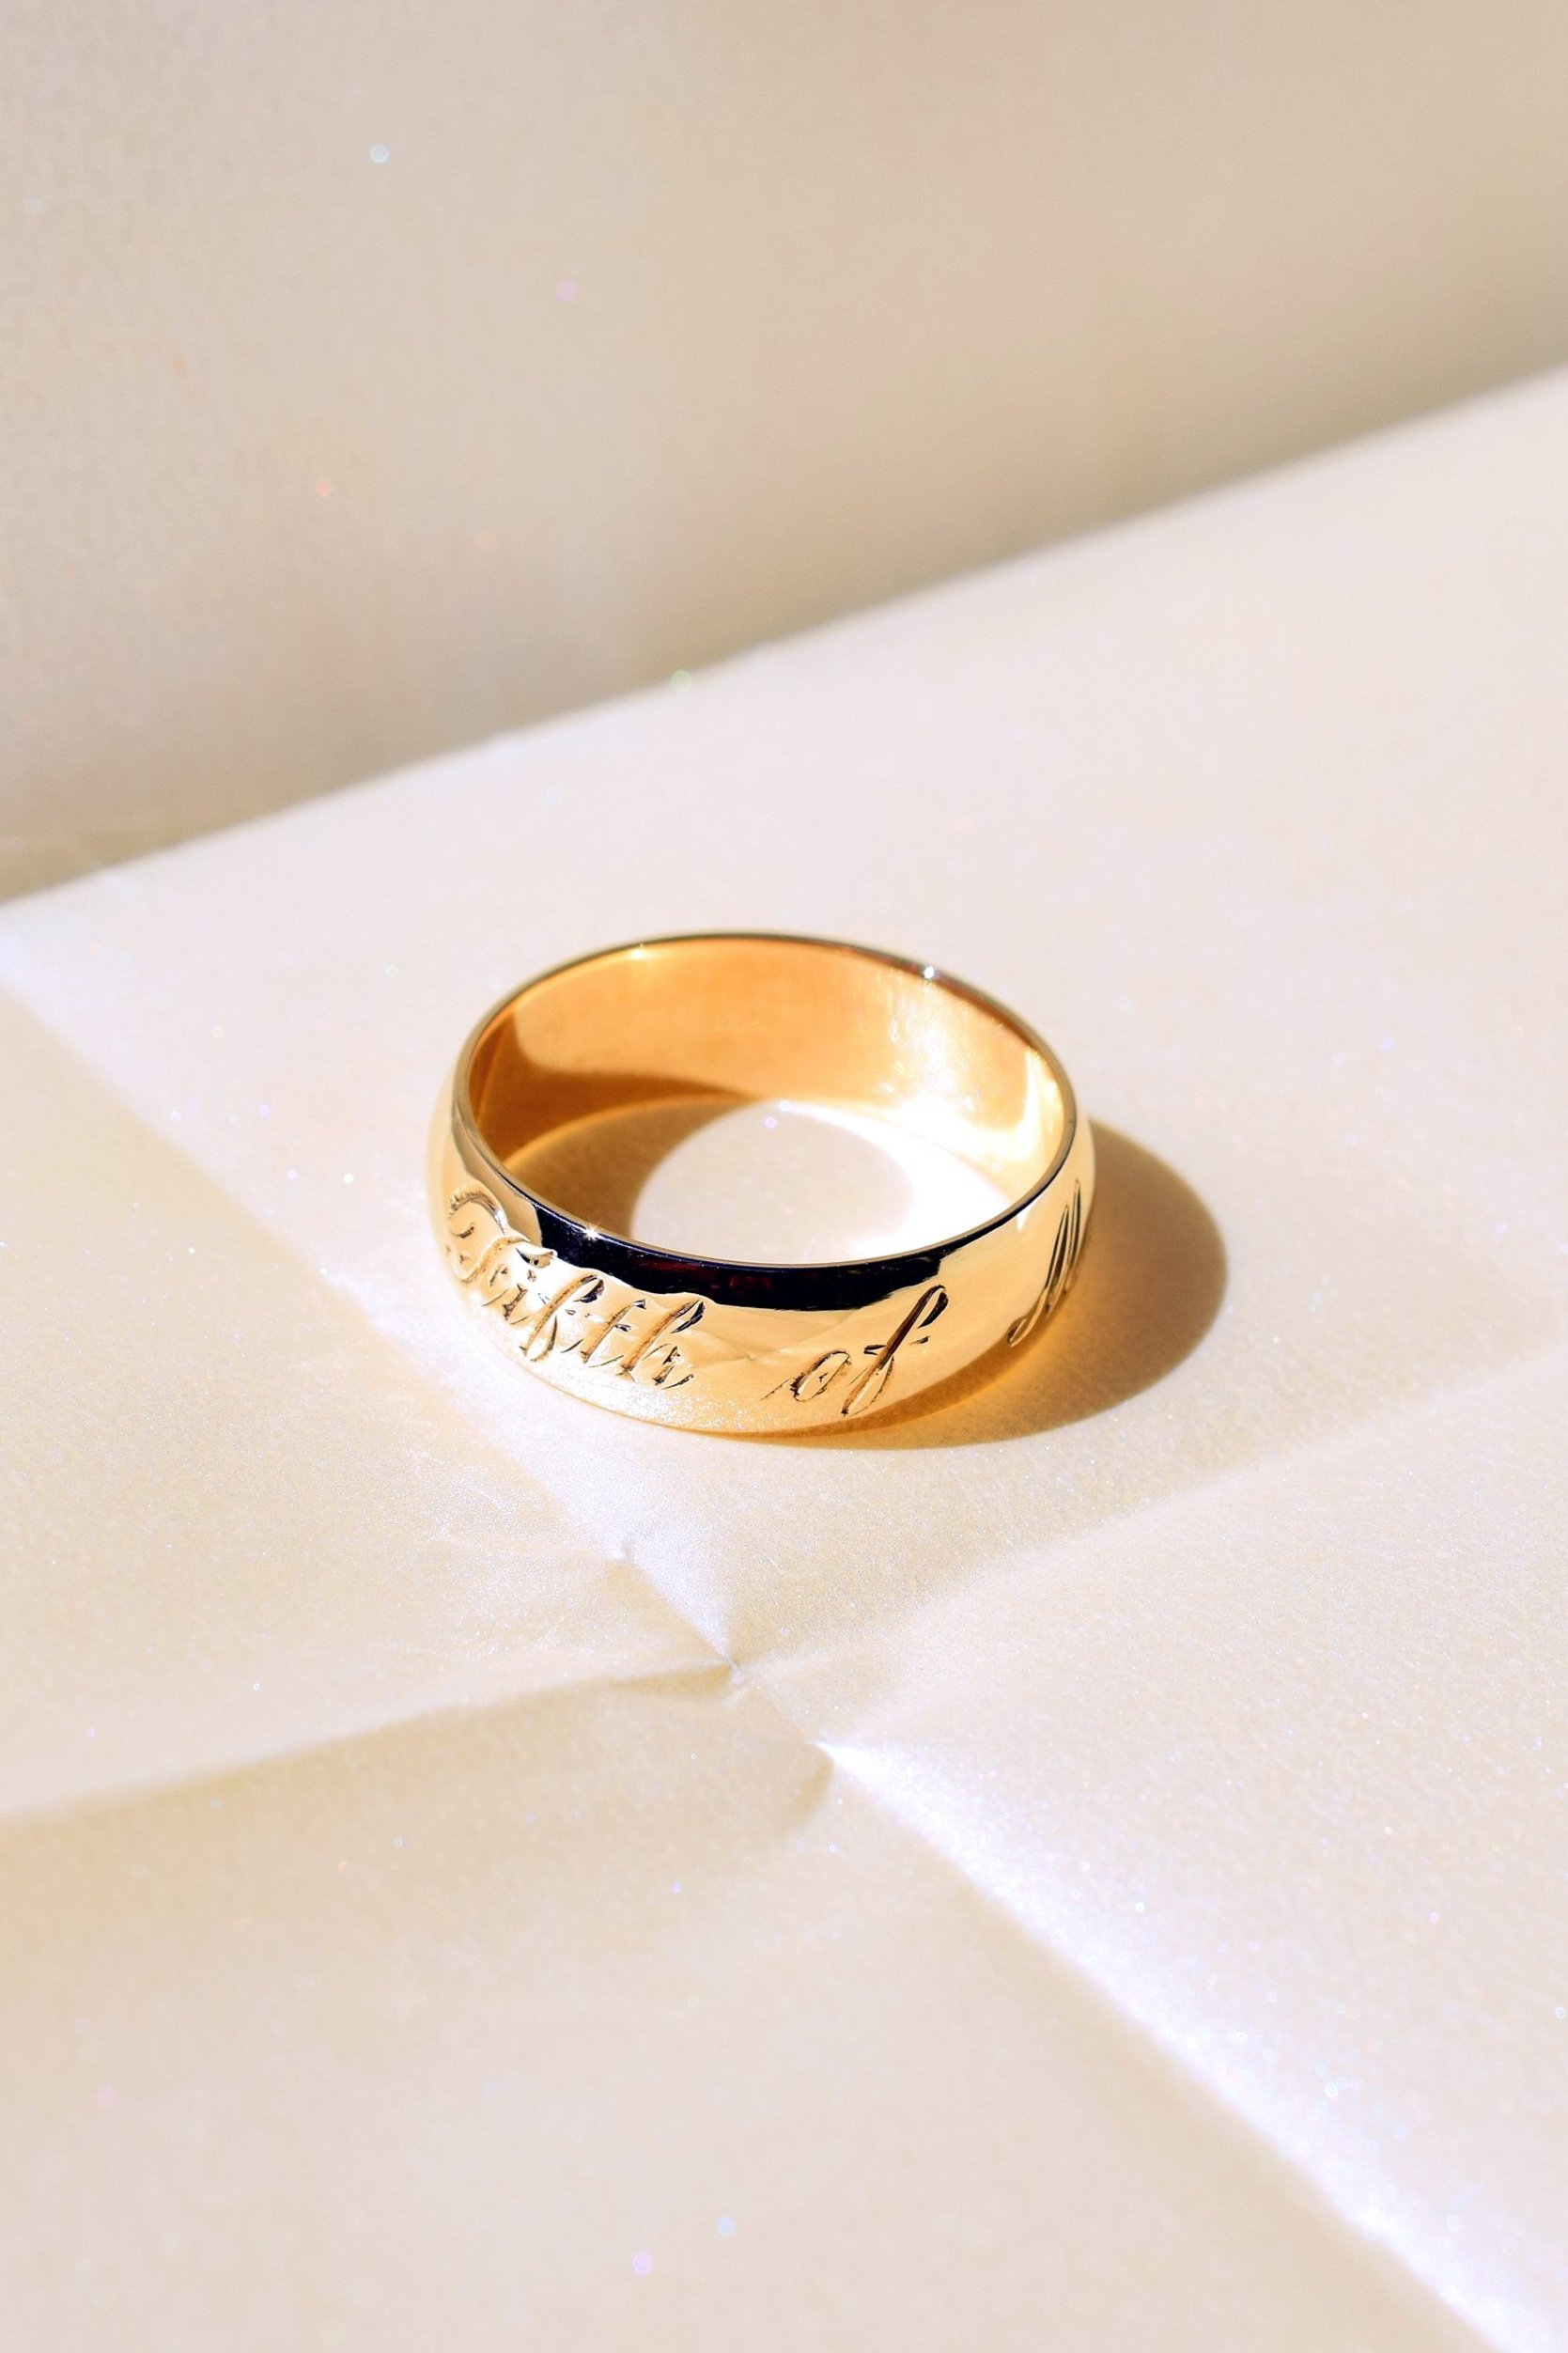 Shop New Engraved Birthstone Rings Online | OurCoordinates